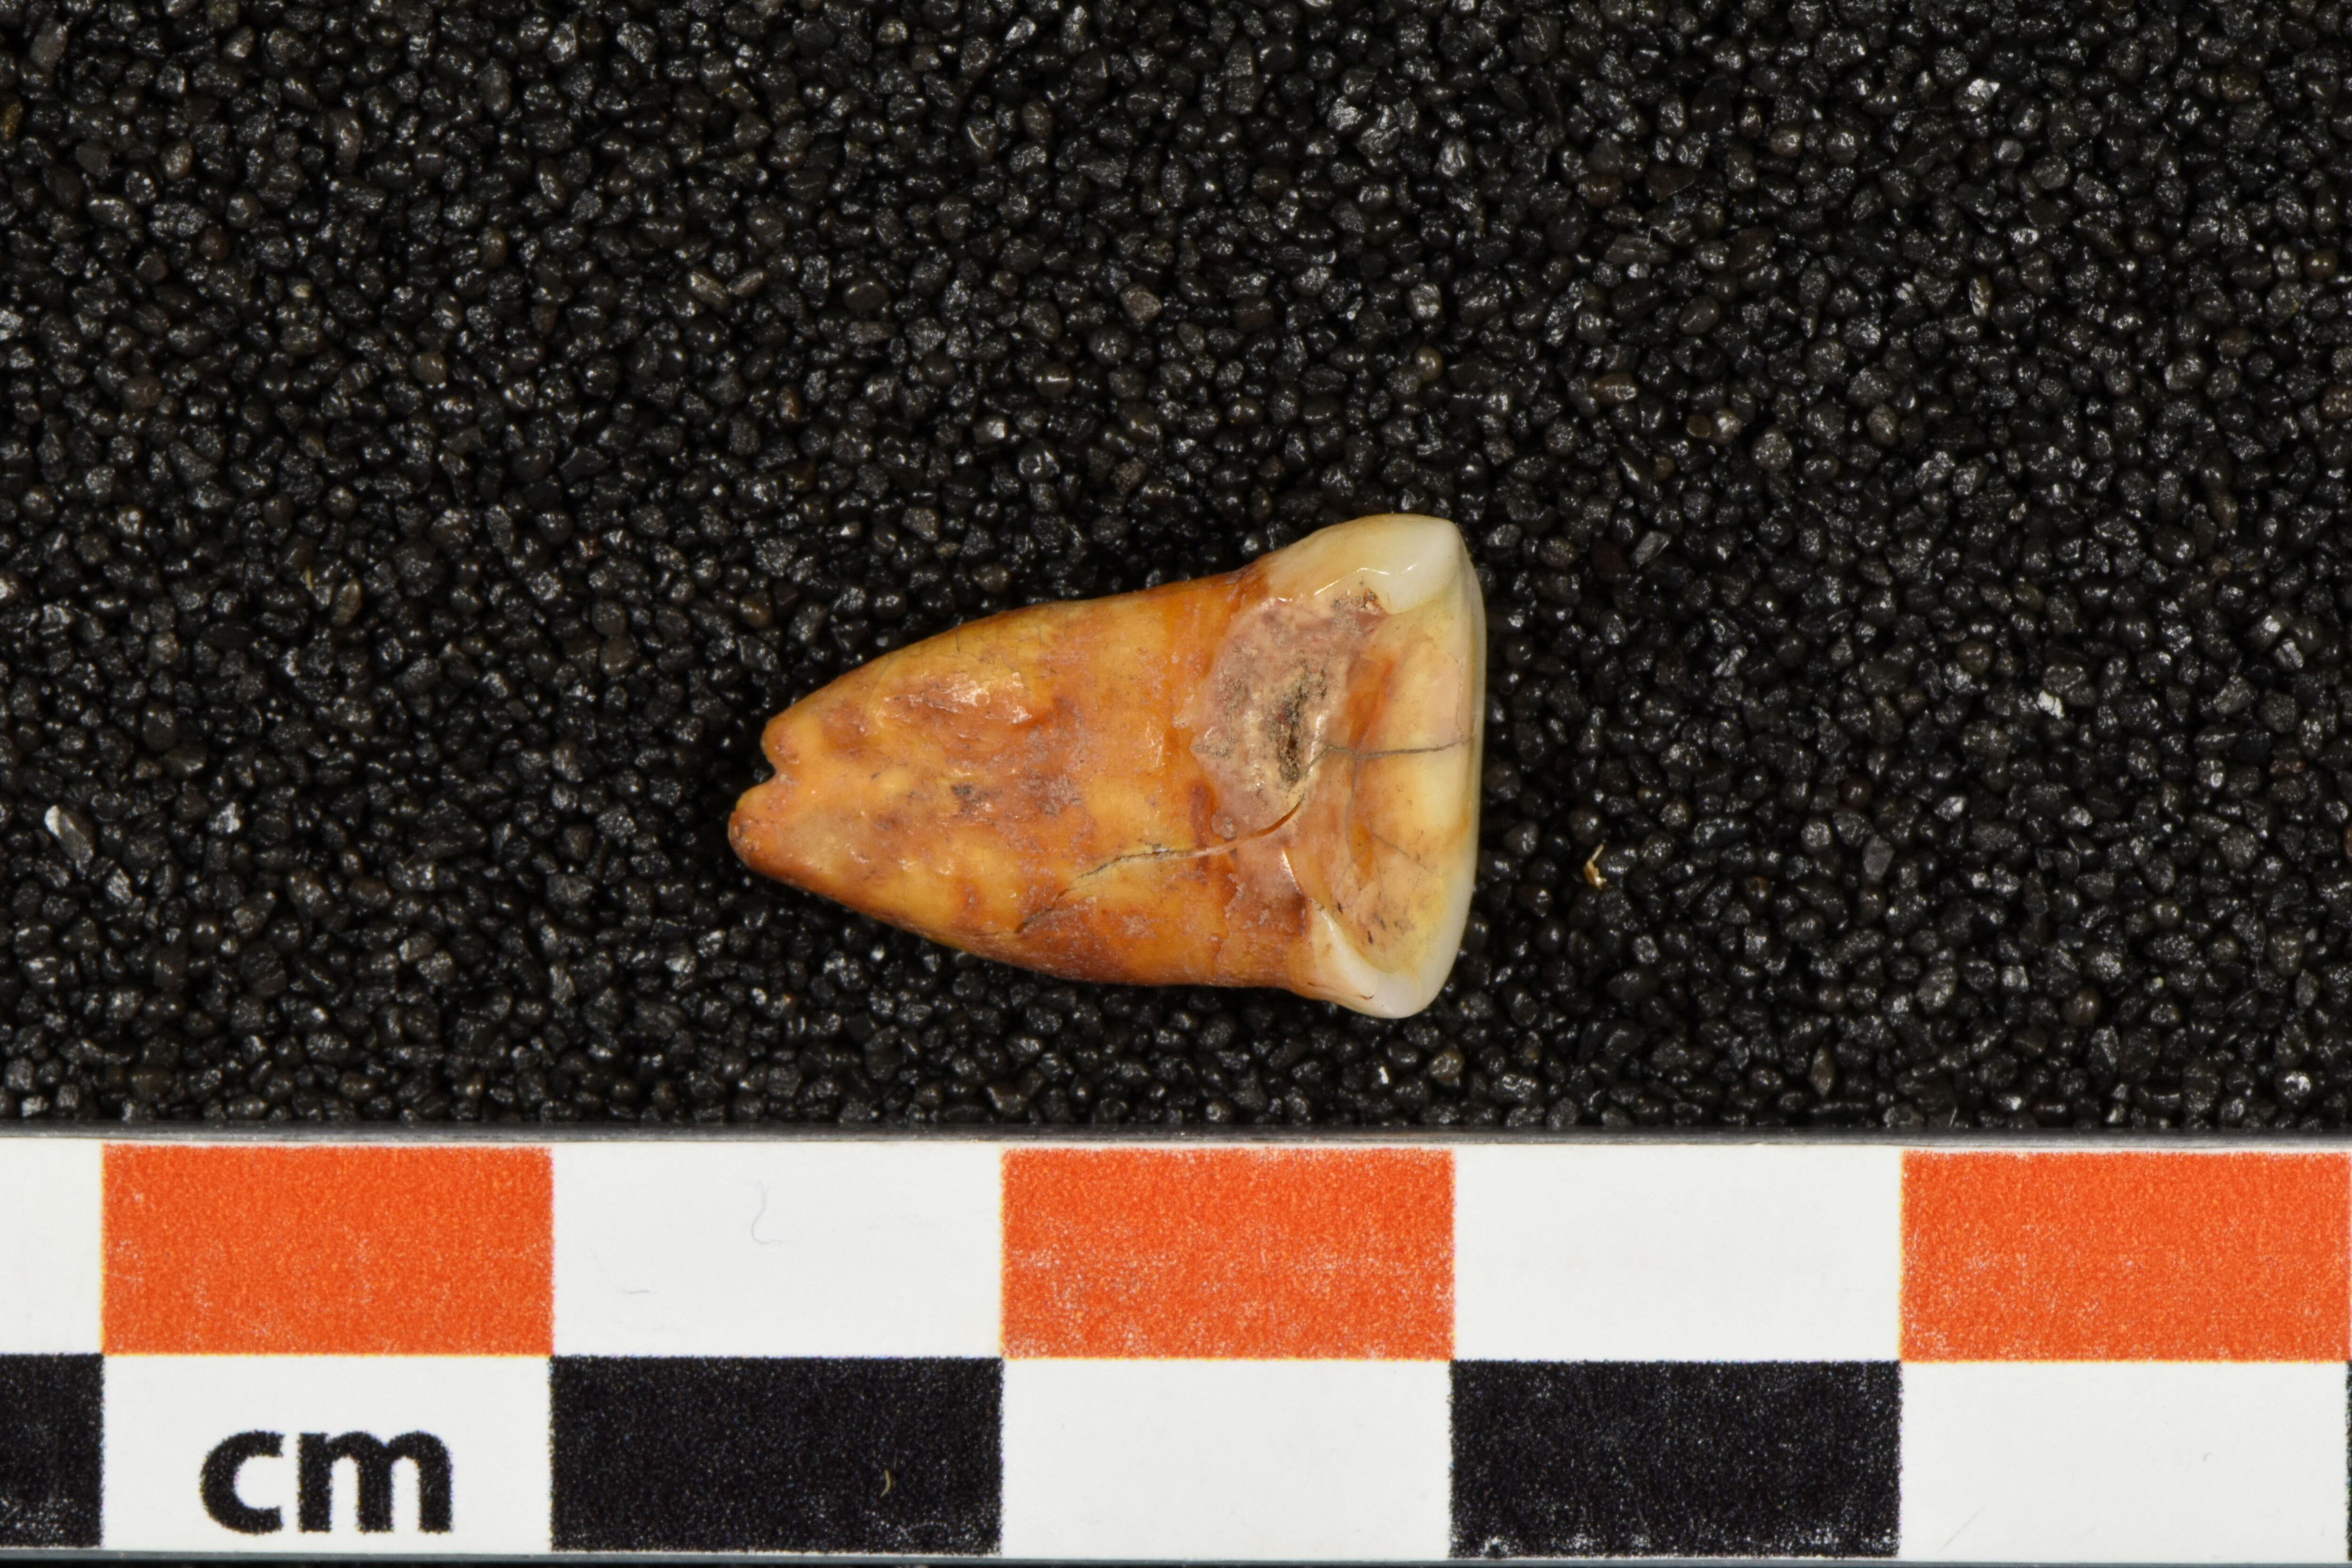 moroccan cave sheds light on stone age man's vegetable-rich diet